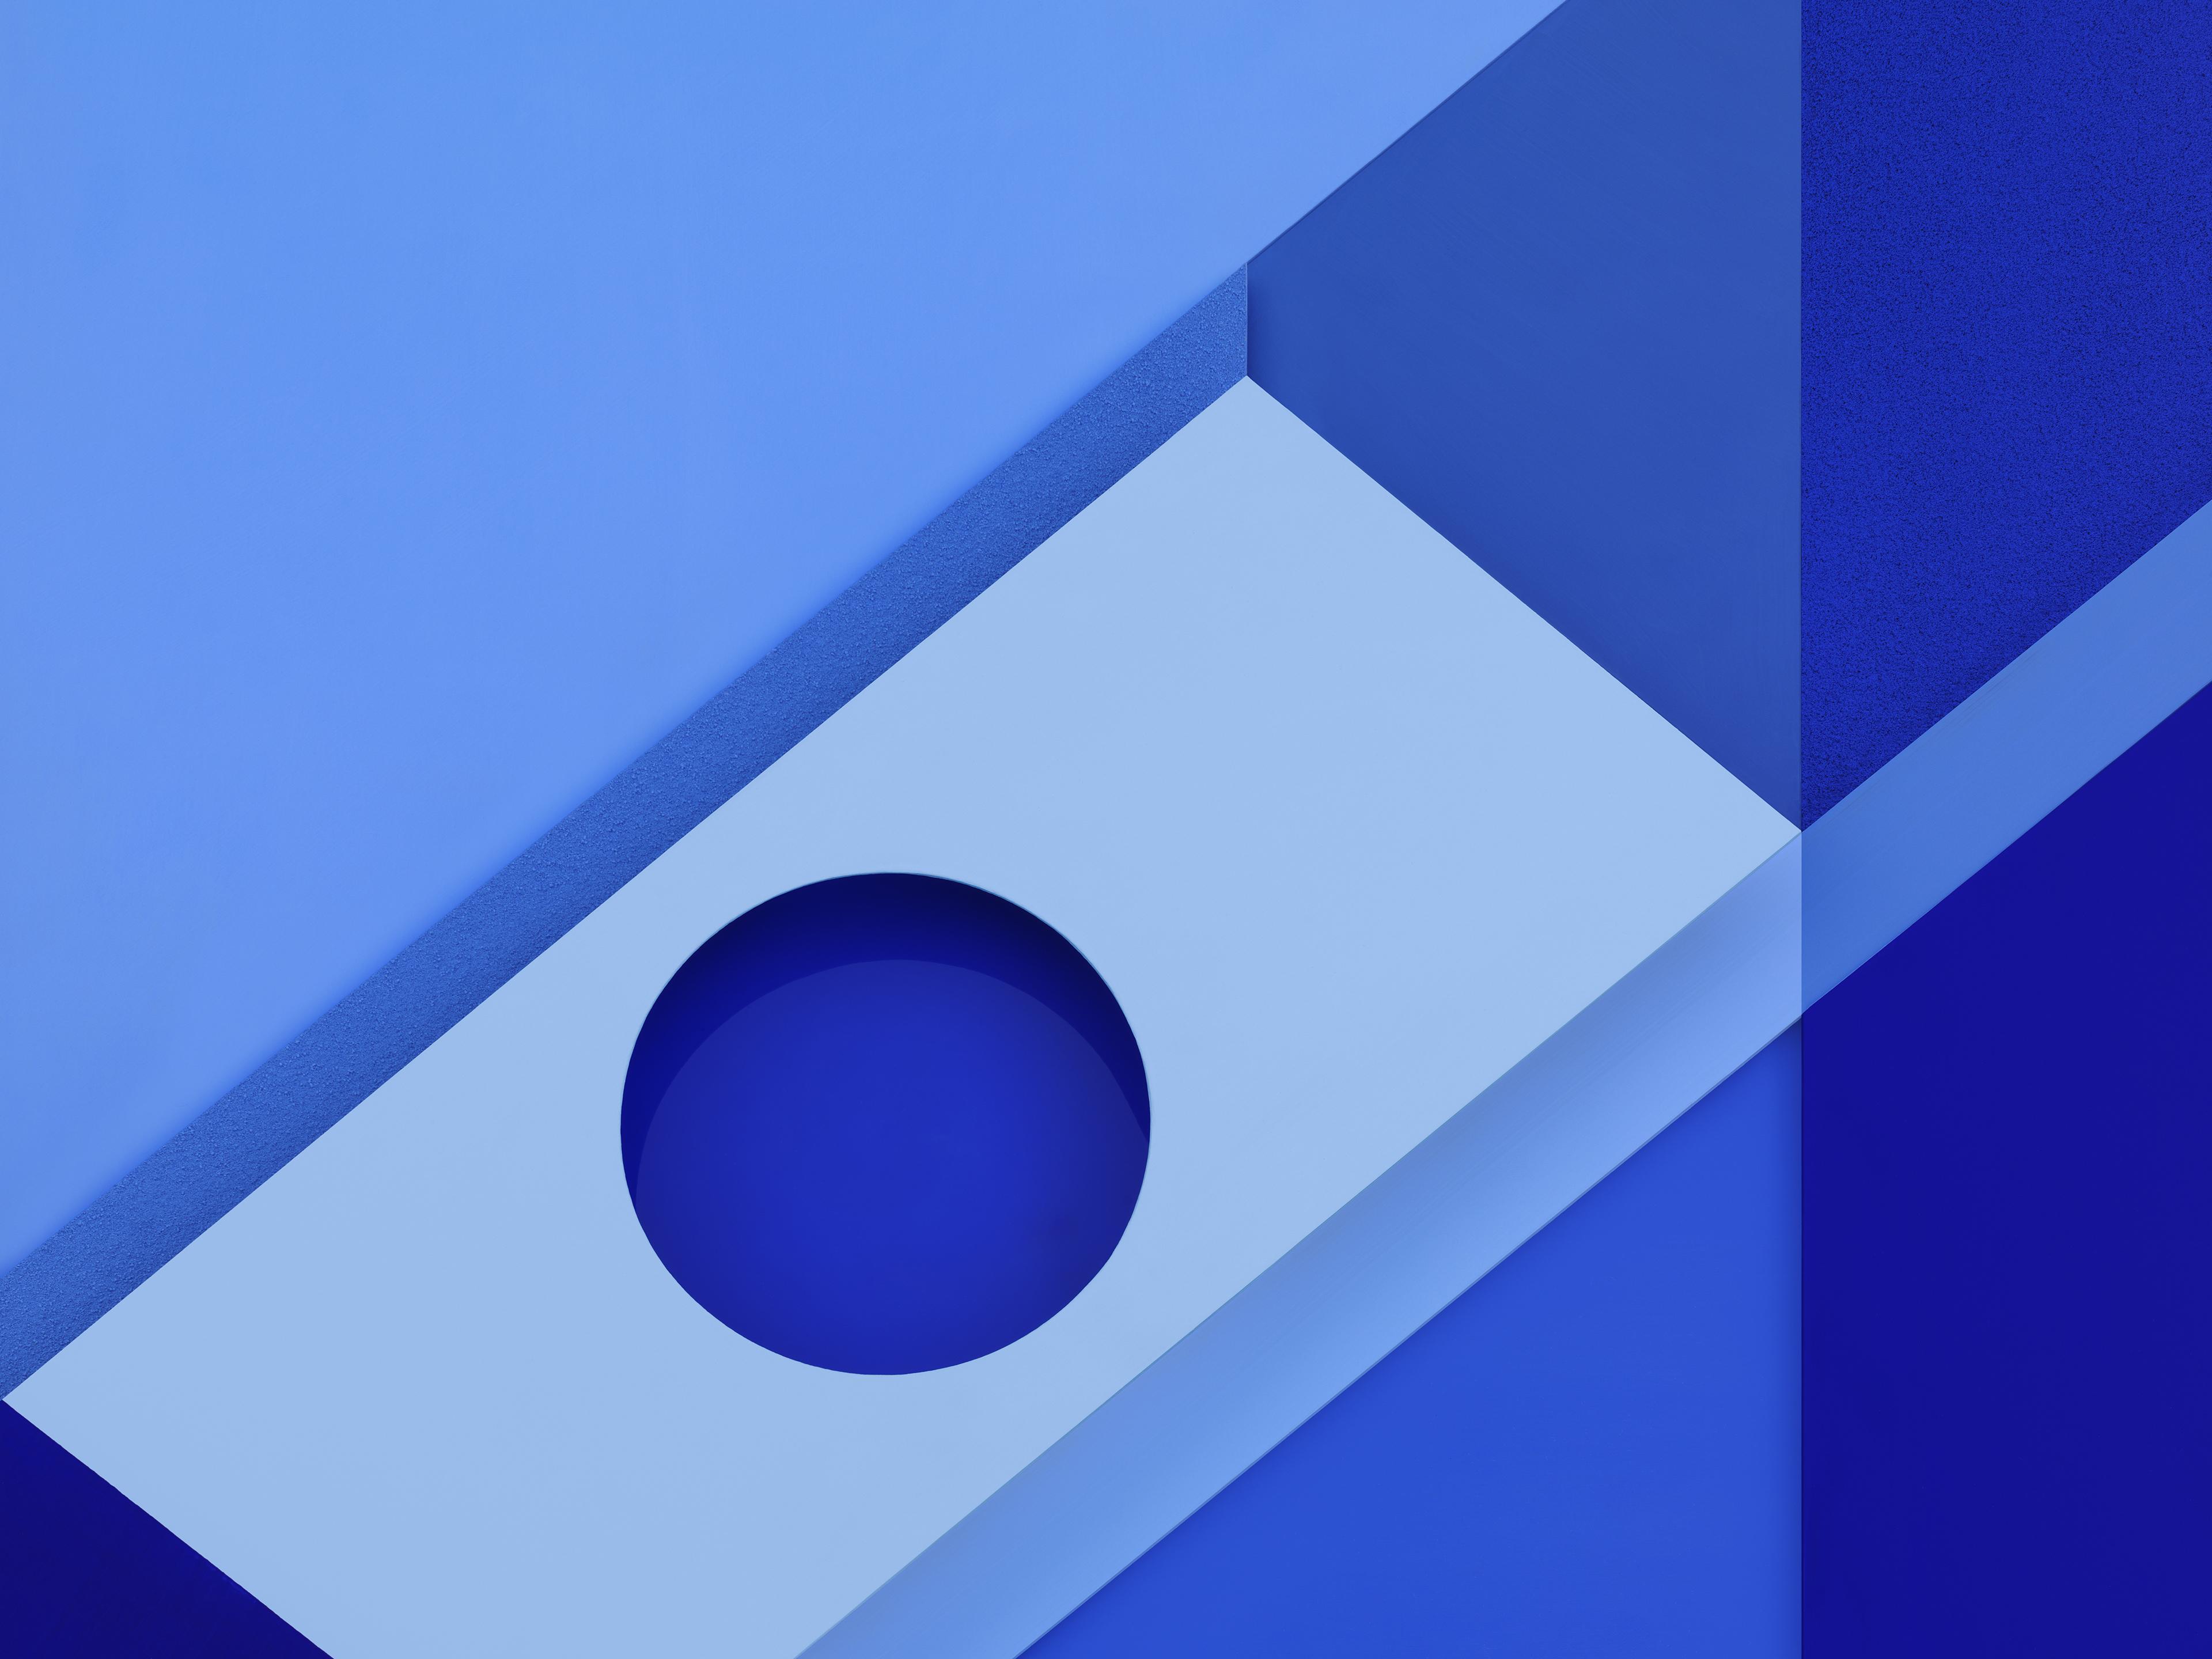 Here's how Google made the stock wallpaper in Android 6.0 Marshmallow